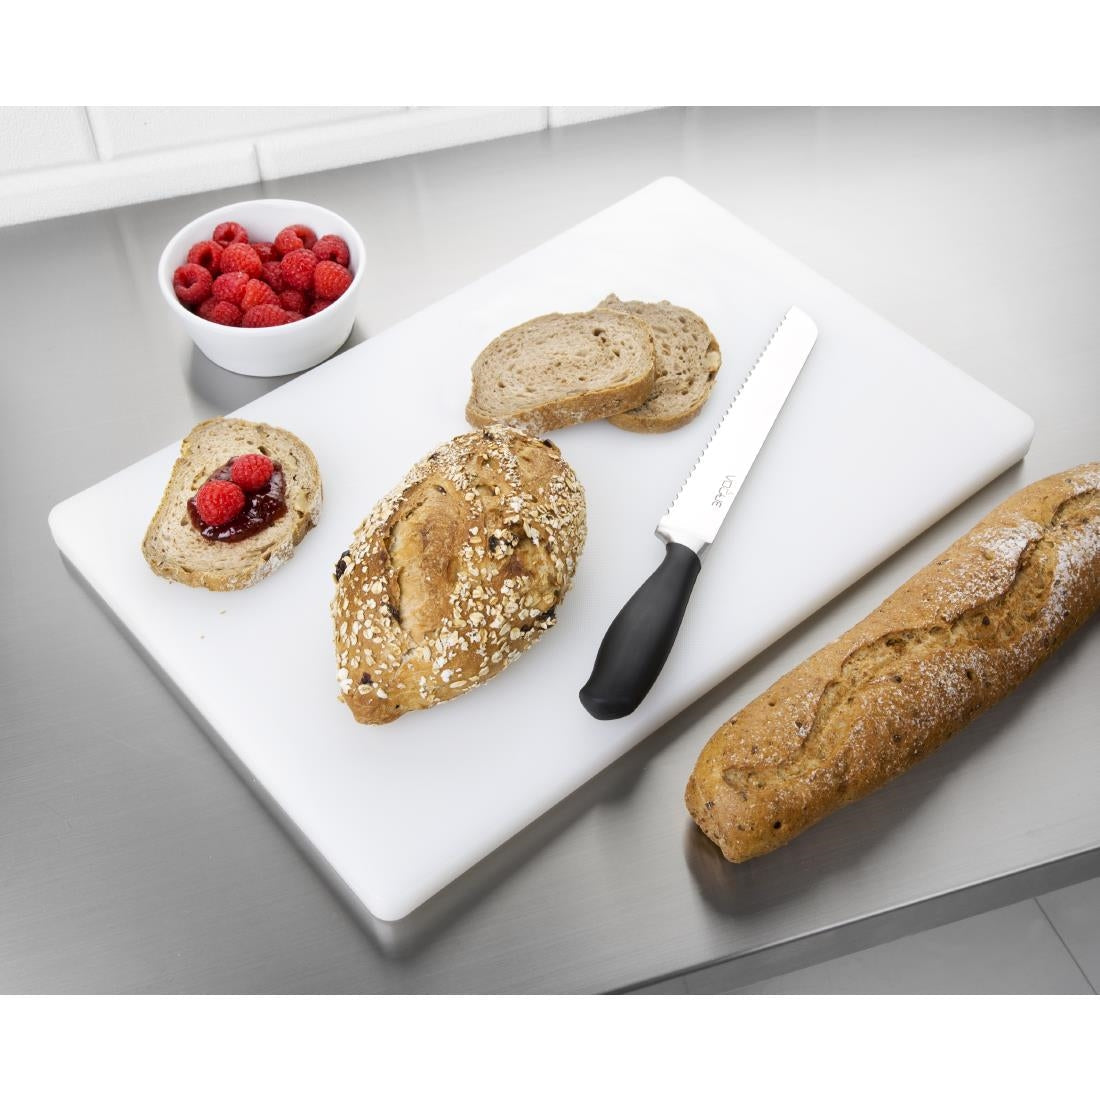 DM001 Hygiplas Extra Thick Low Density White Chopping Board Standard JD Catering Equipment Solutions Ltd